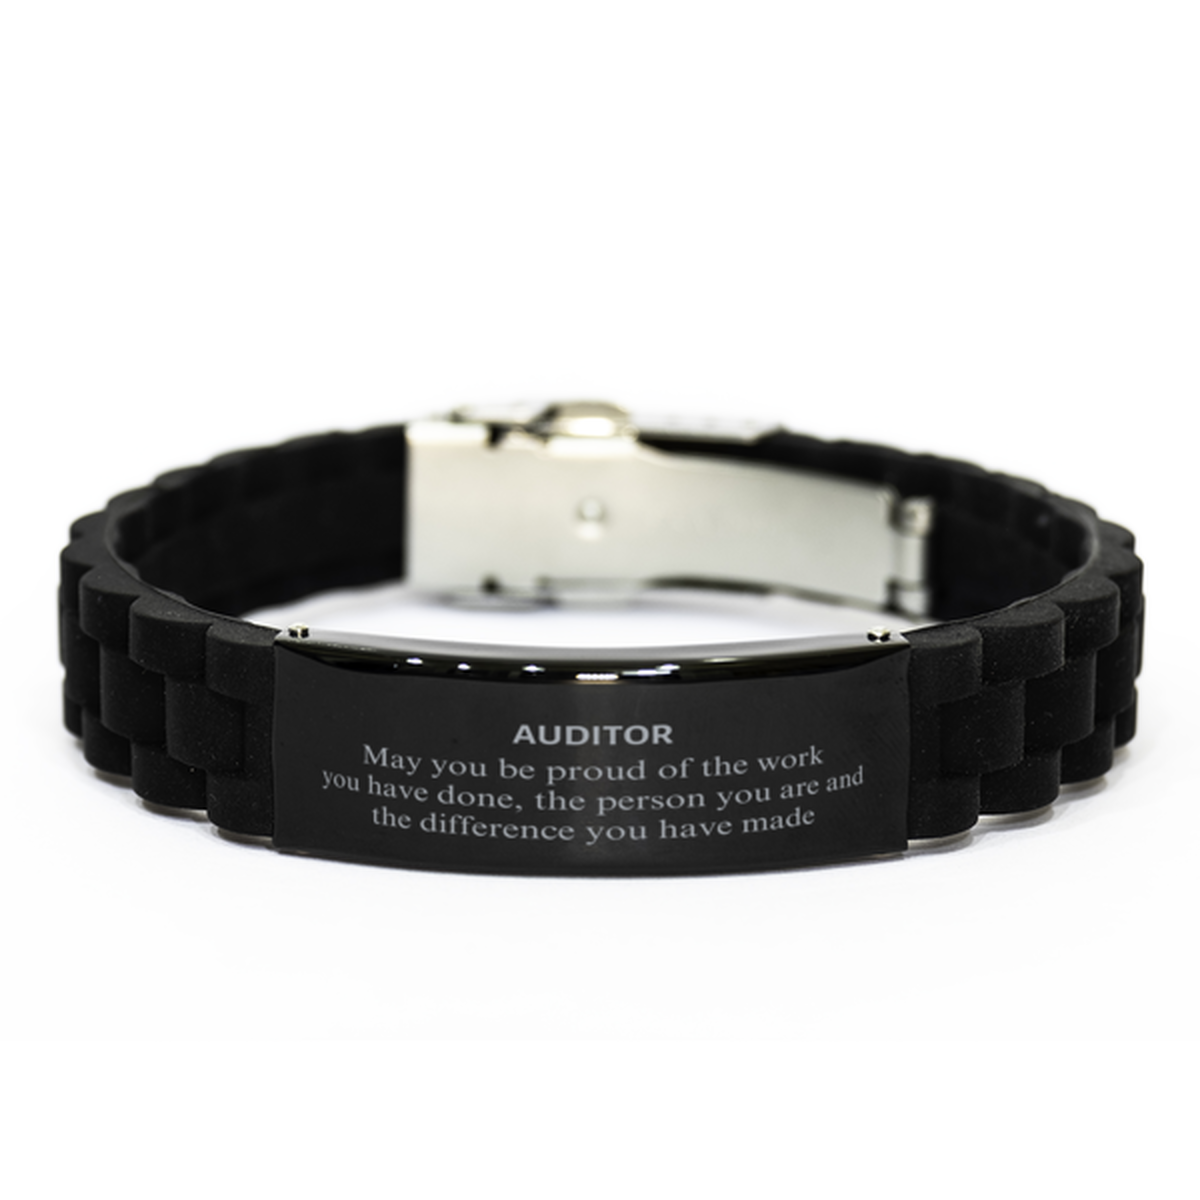 Auditor May you be proud of the work you have done, Retirement Auditor Black Glidelock Clasp Bracelet for Colleague Appreciation Gifts Amazing for Auditor